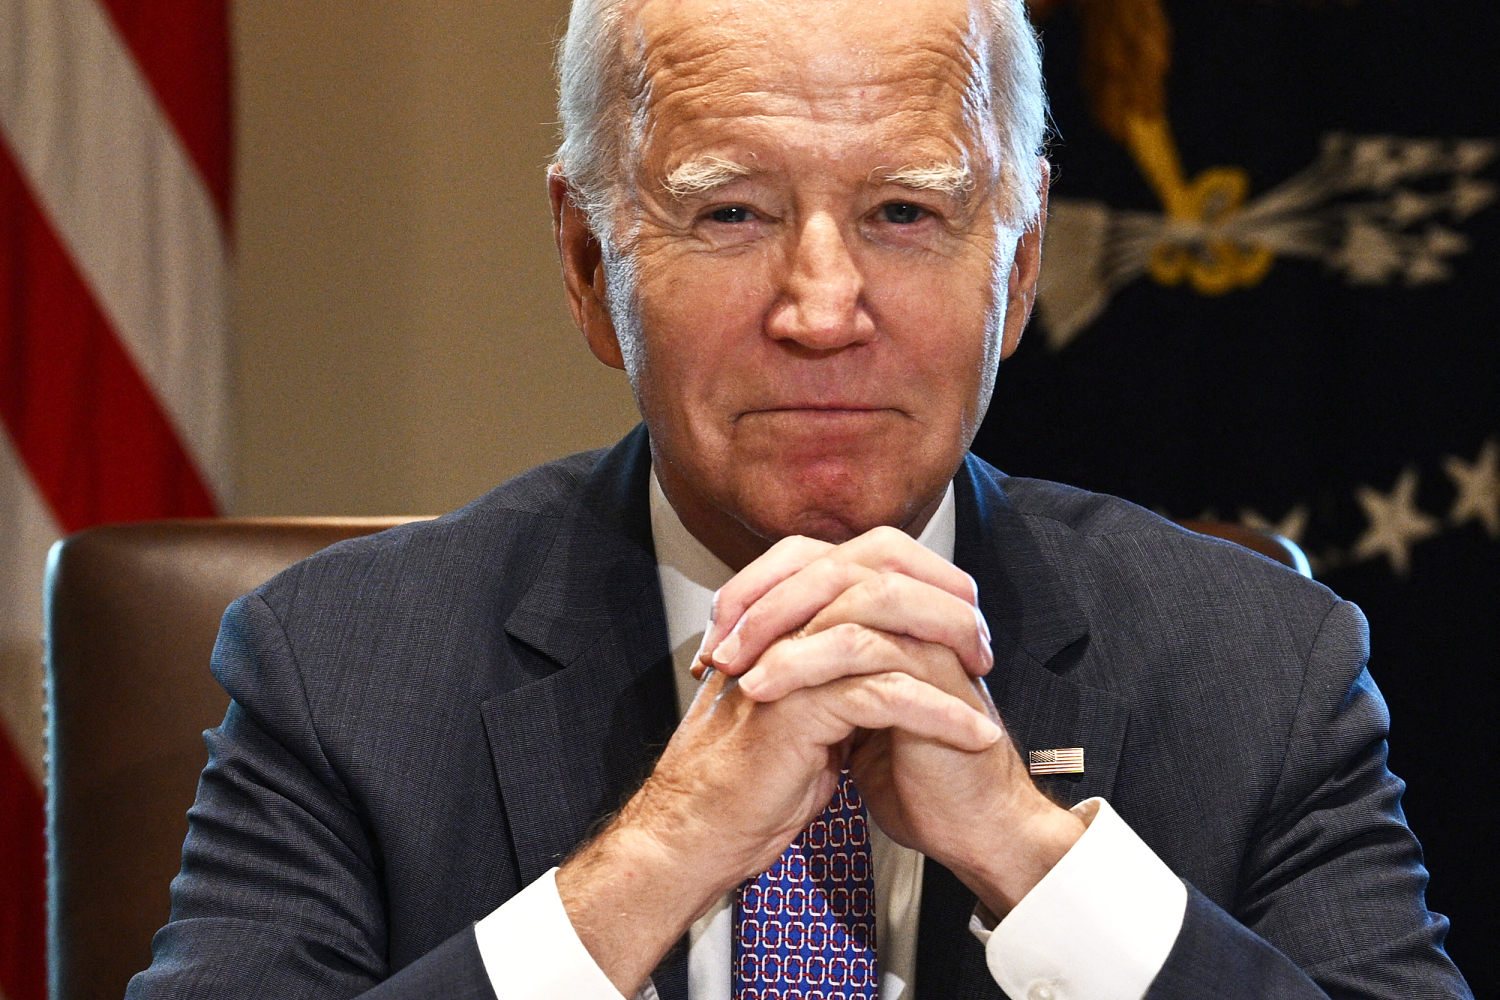 Biden refuses to take a cognitive or neurological test in his first post-debate TV interview